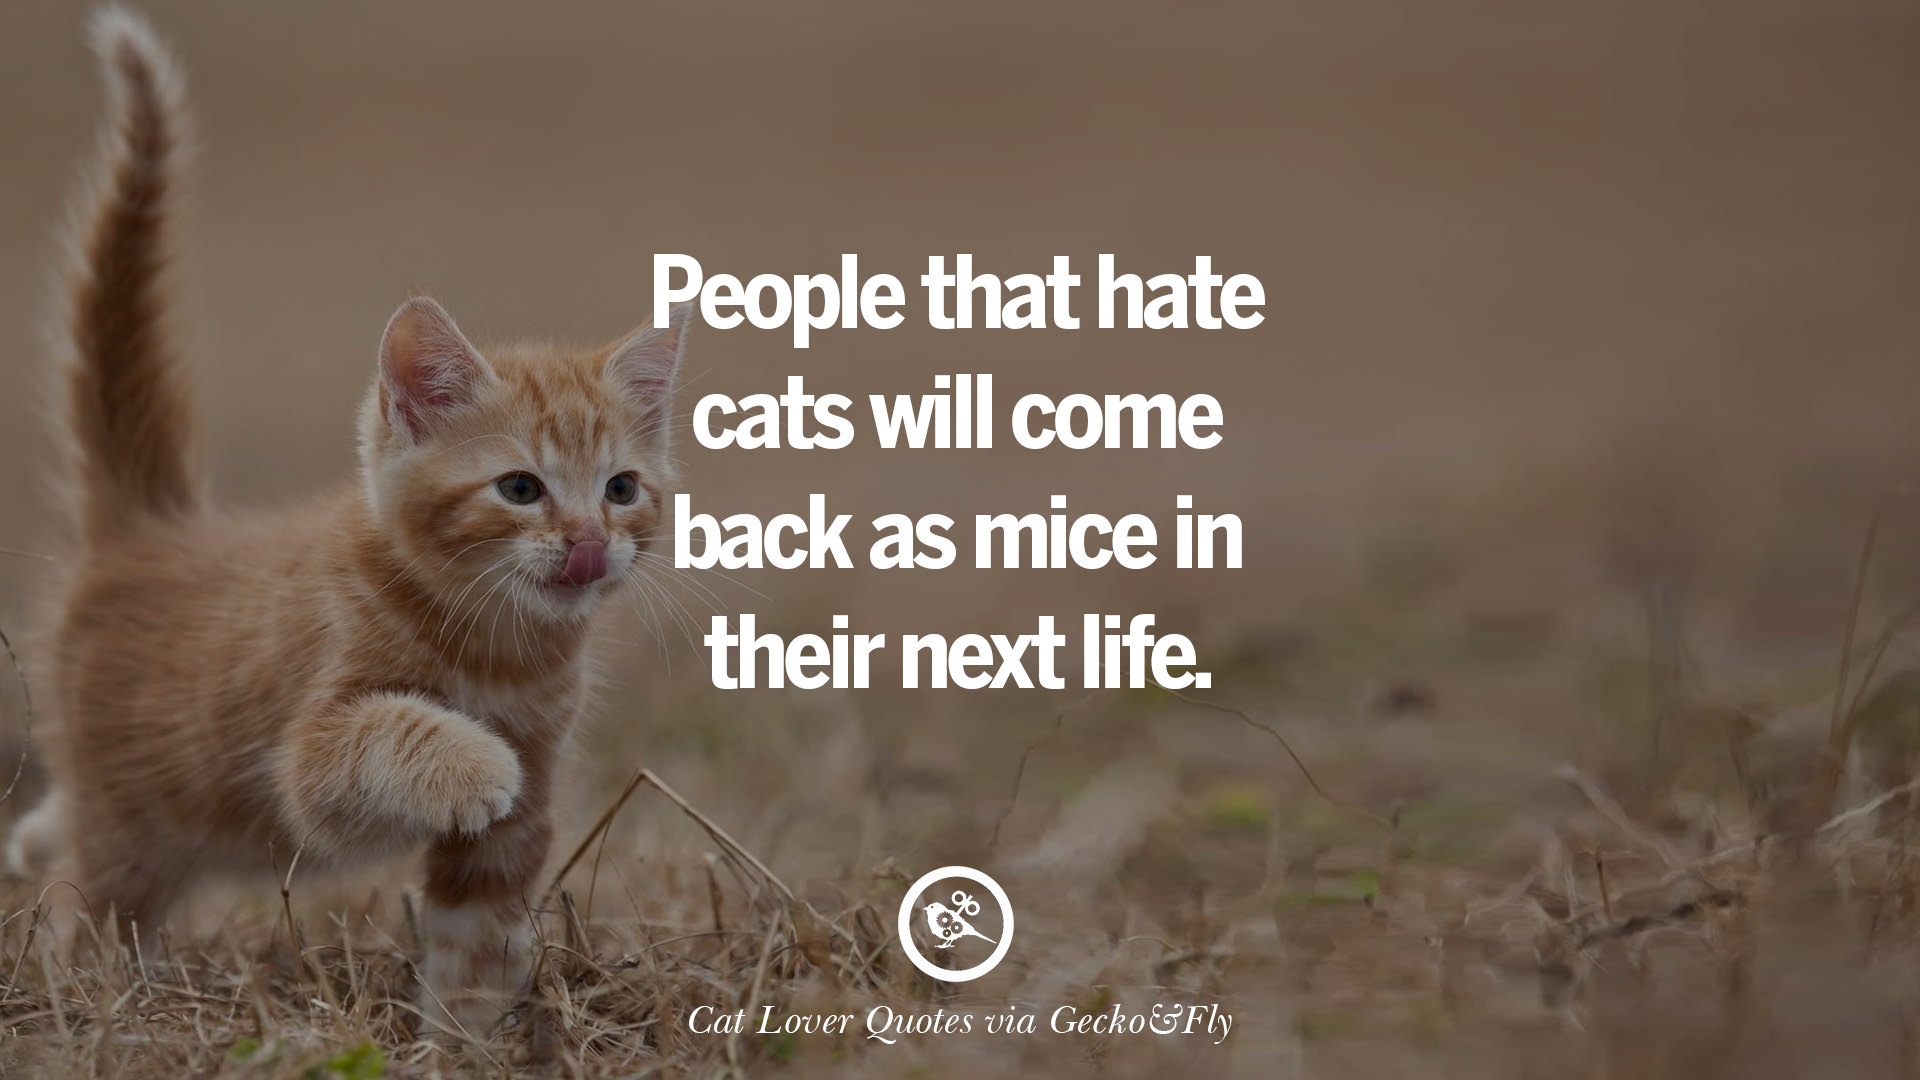 People that hate cats will e back as mice in their next life